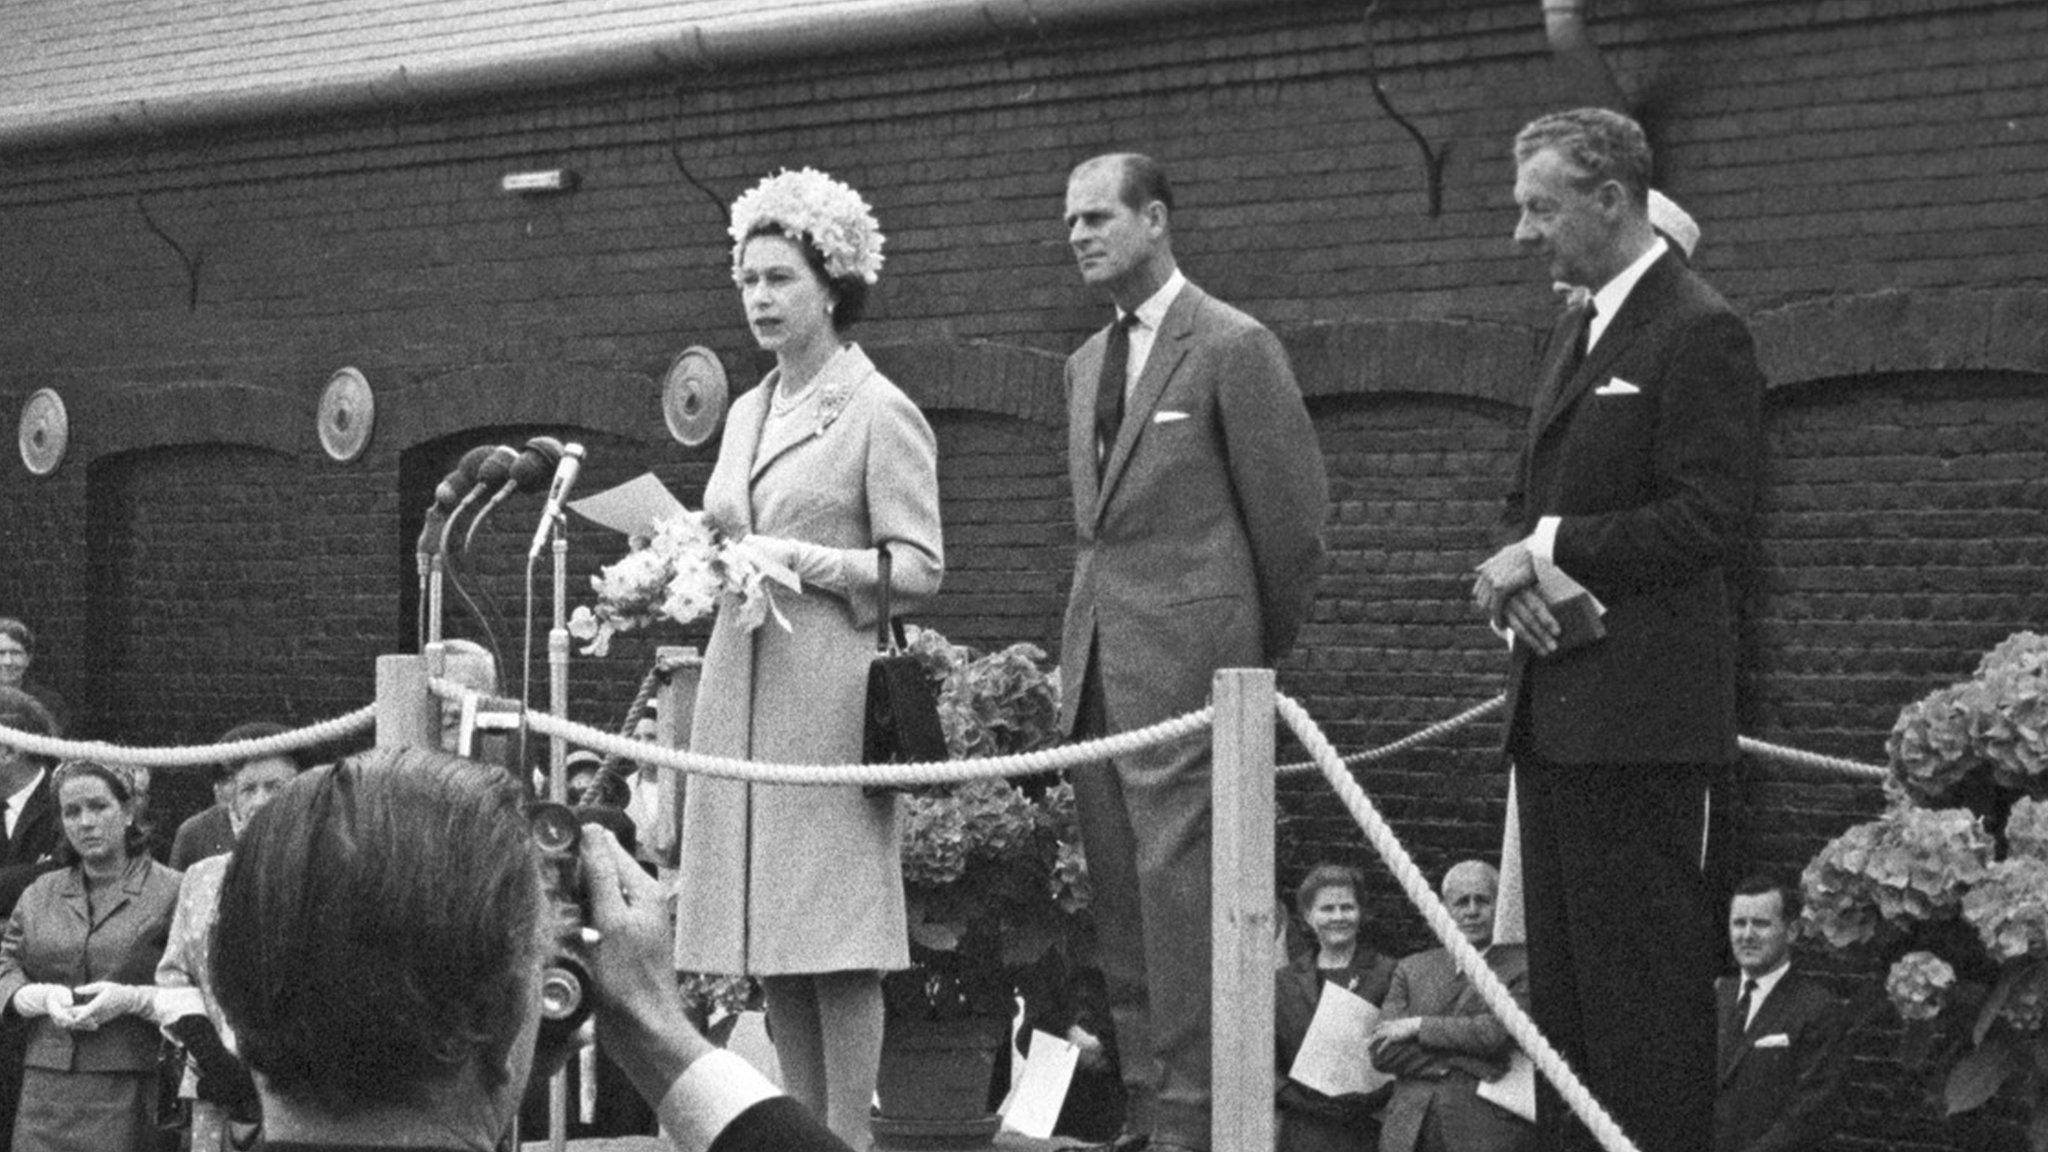 The Queen, Prince Philip and Benjamin Britten at Snape Maltings